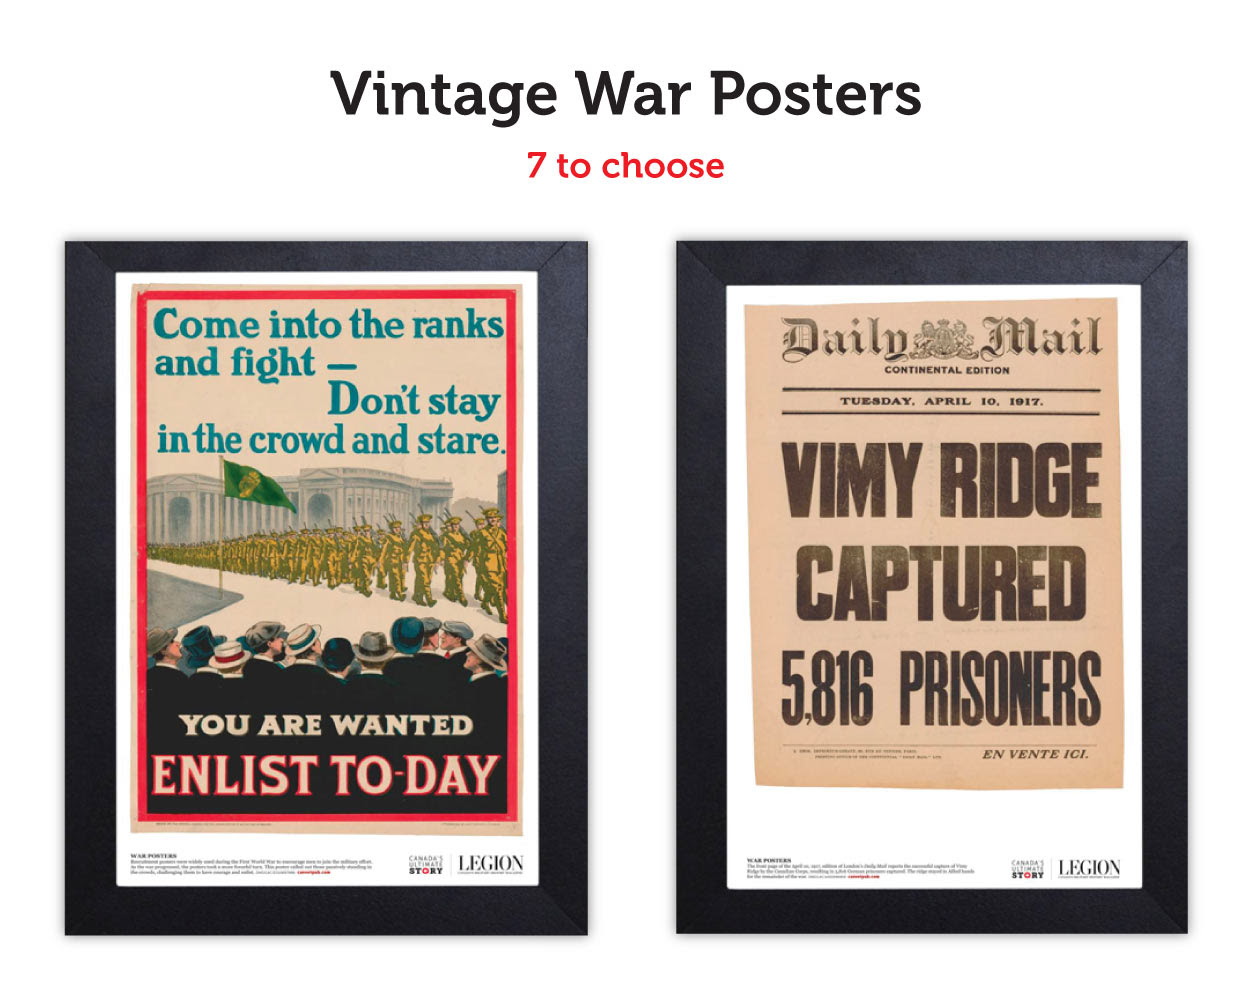 Commemorative Posters from the Second World War